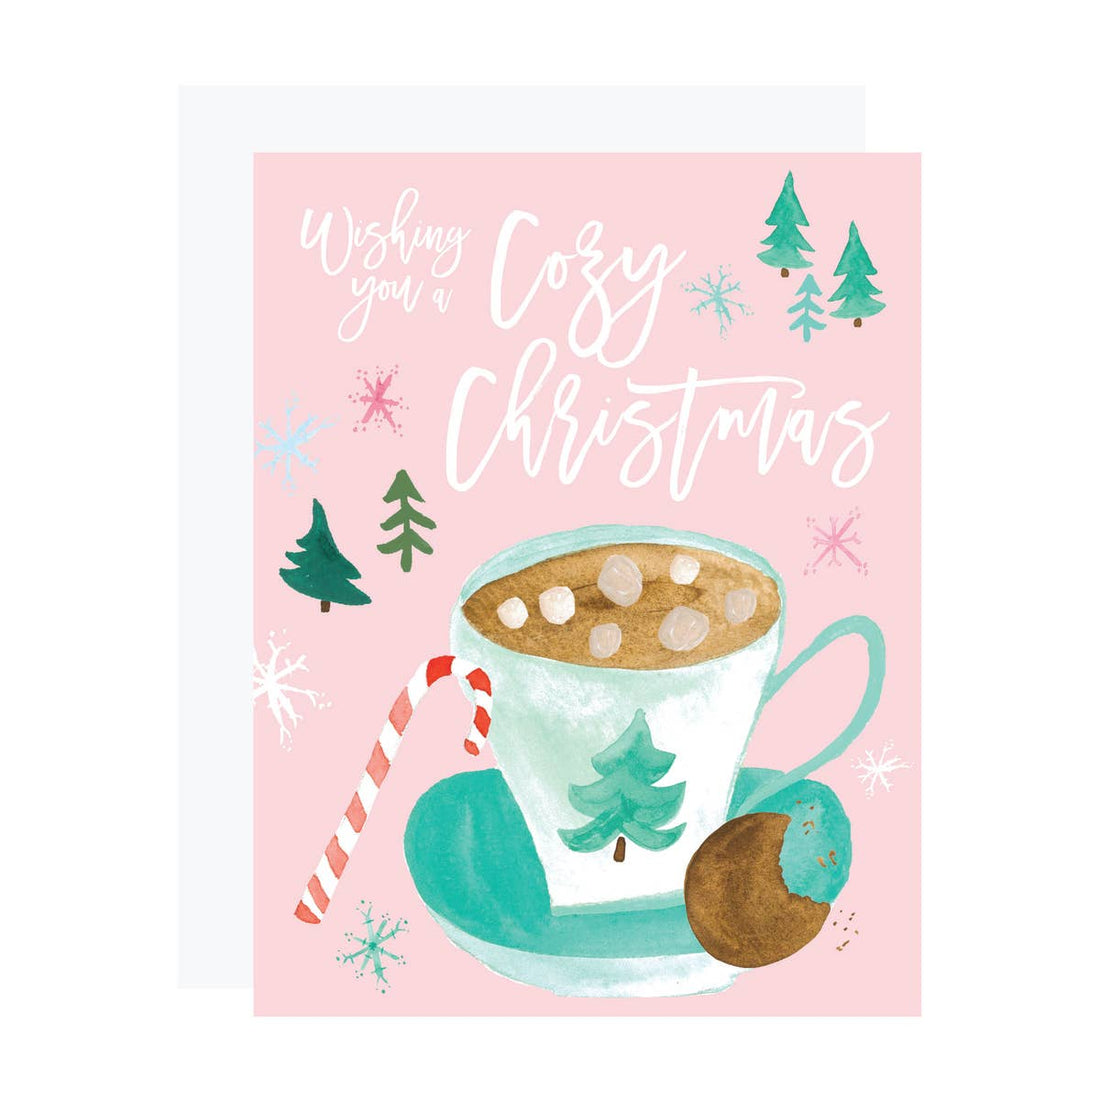 Wishing you a Cozy Christmas Cards - Box of 6